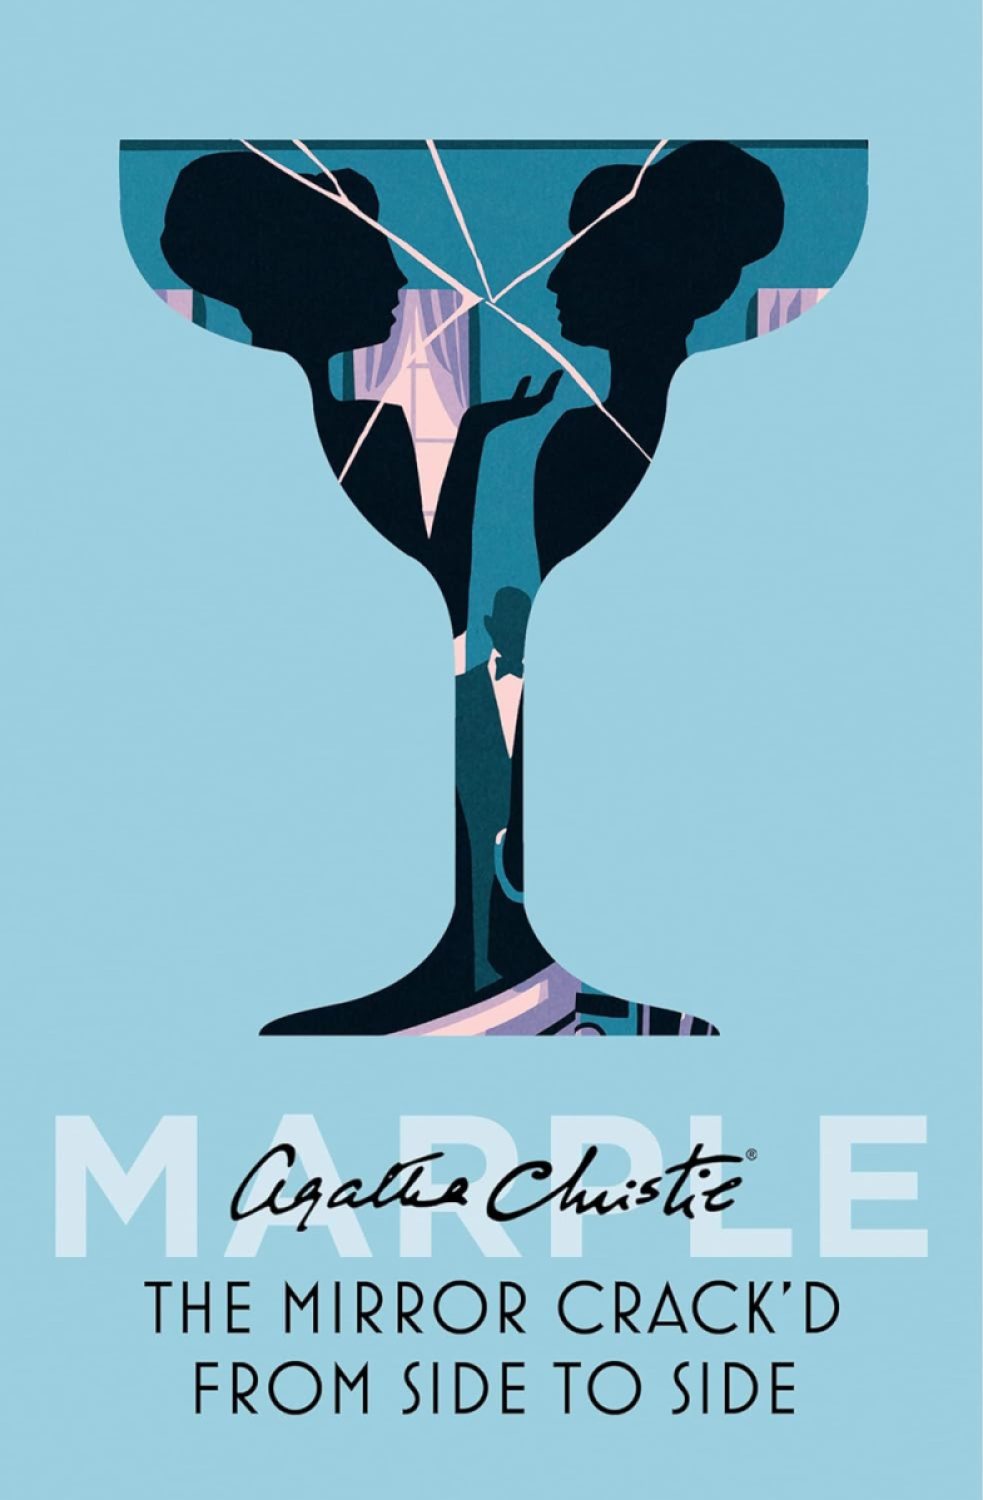 Cover of the Agatha Christie novel A Mirror Cracked from Side to Side; a Blue cover with a cut out shaped like a coupe glass with the silhouettes of two women in it.